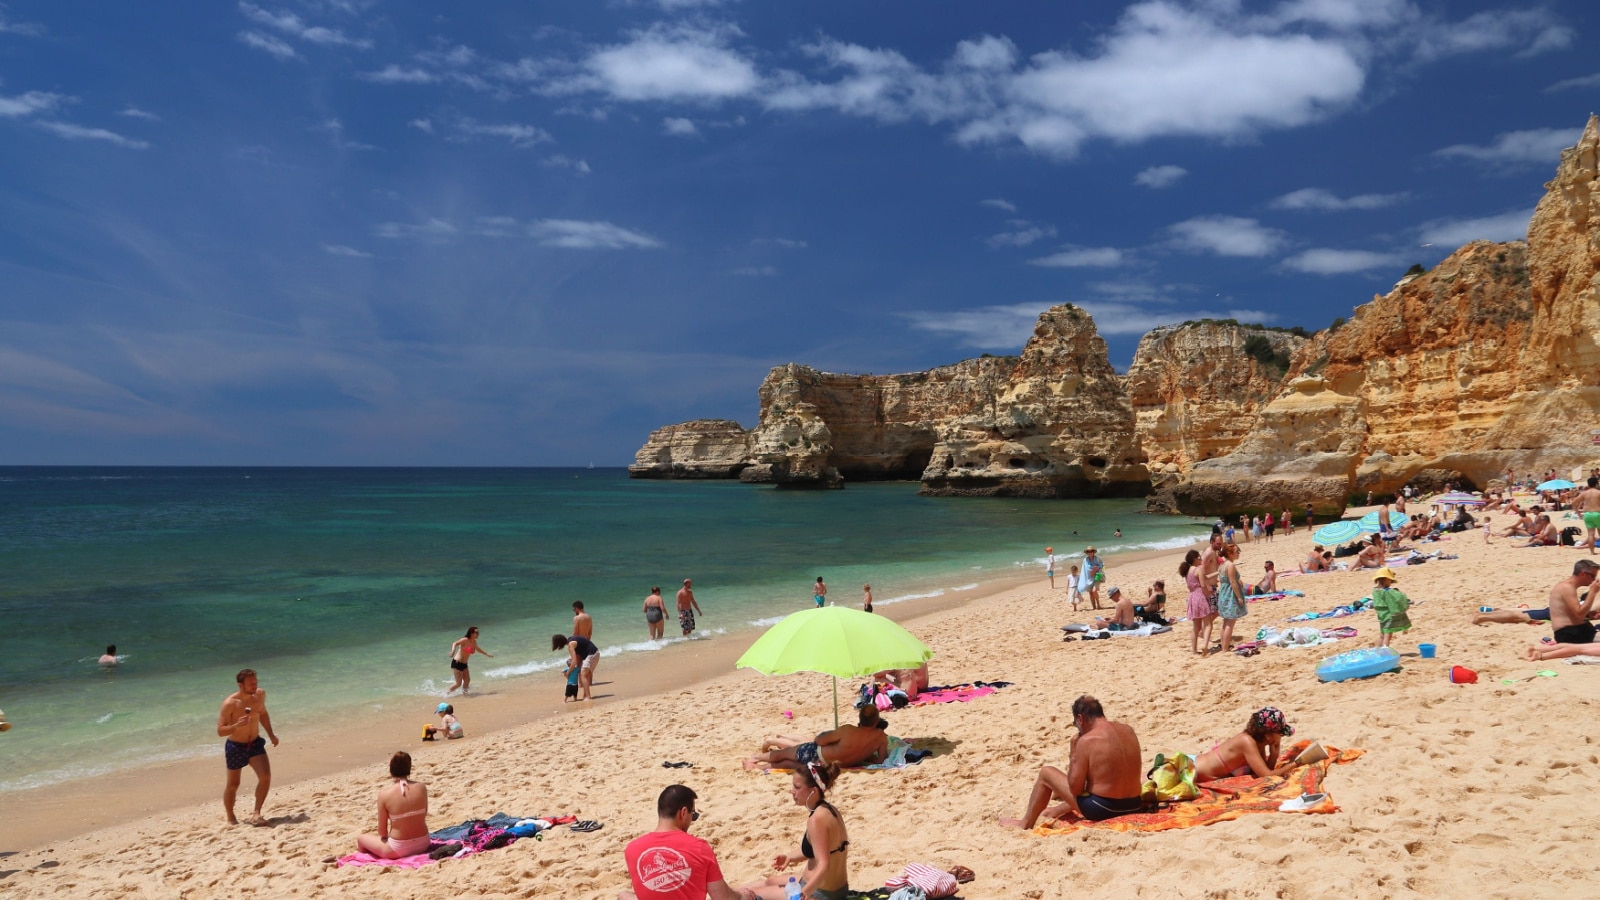 ALGARVE, PORTUGAL - MAY 31, 2018: Beachgoers visit Marinha Beach in Algarve region, Portugal. Coastal region of Algarve attracts more than 17 million tourists annually.